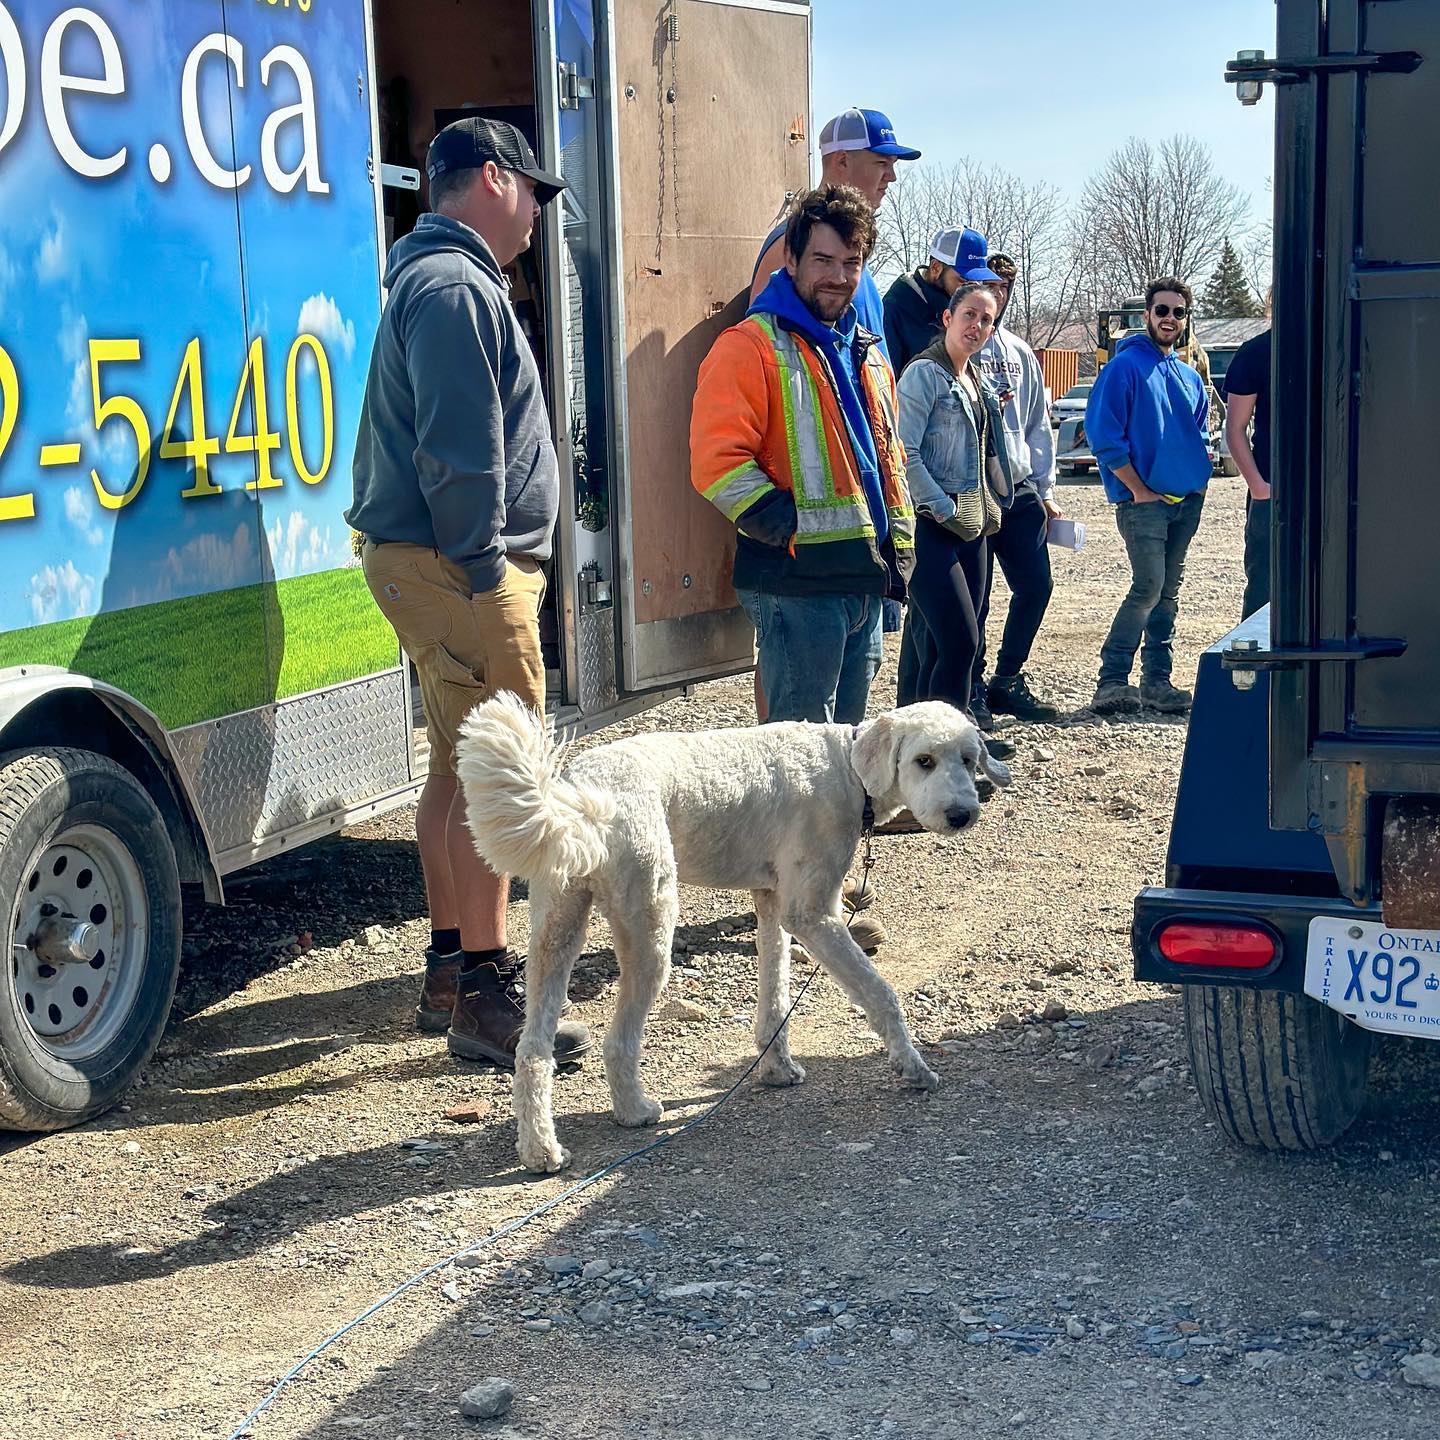 A group of people in casual and work attire stand near a trailer. Two dogs, one with a fluffy tail, are in the foreground.